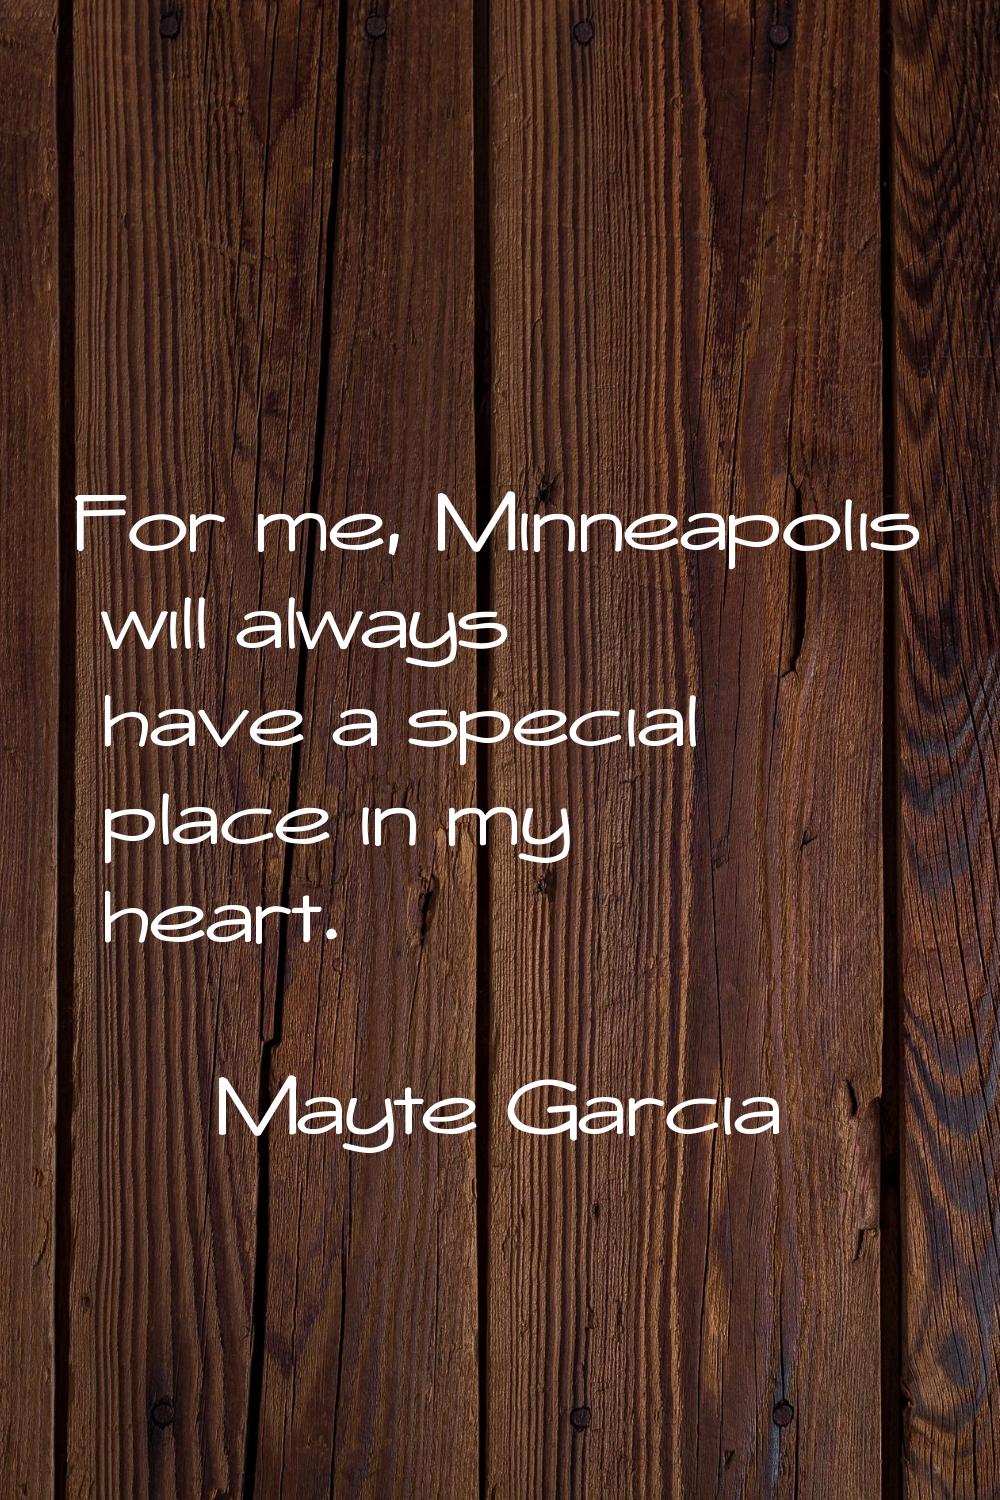 For me, Minneapolis will always have a special place in my heart.